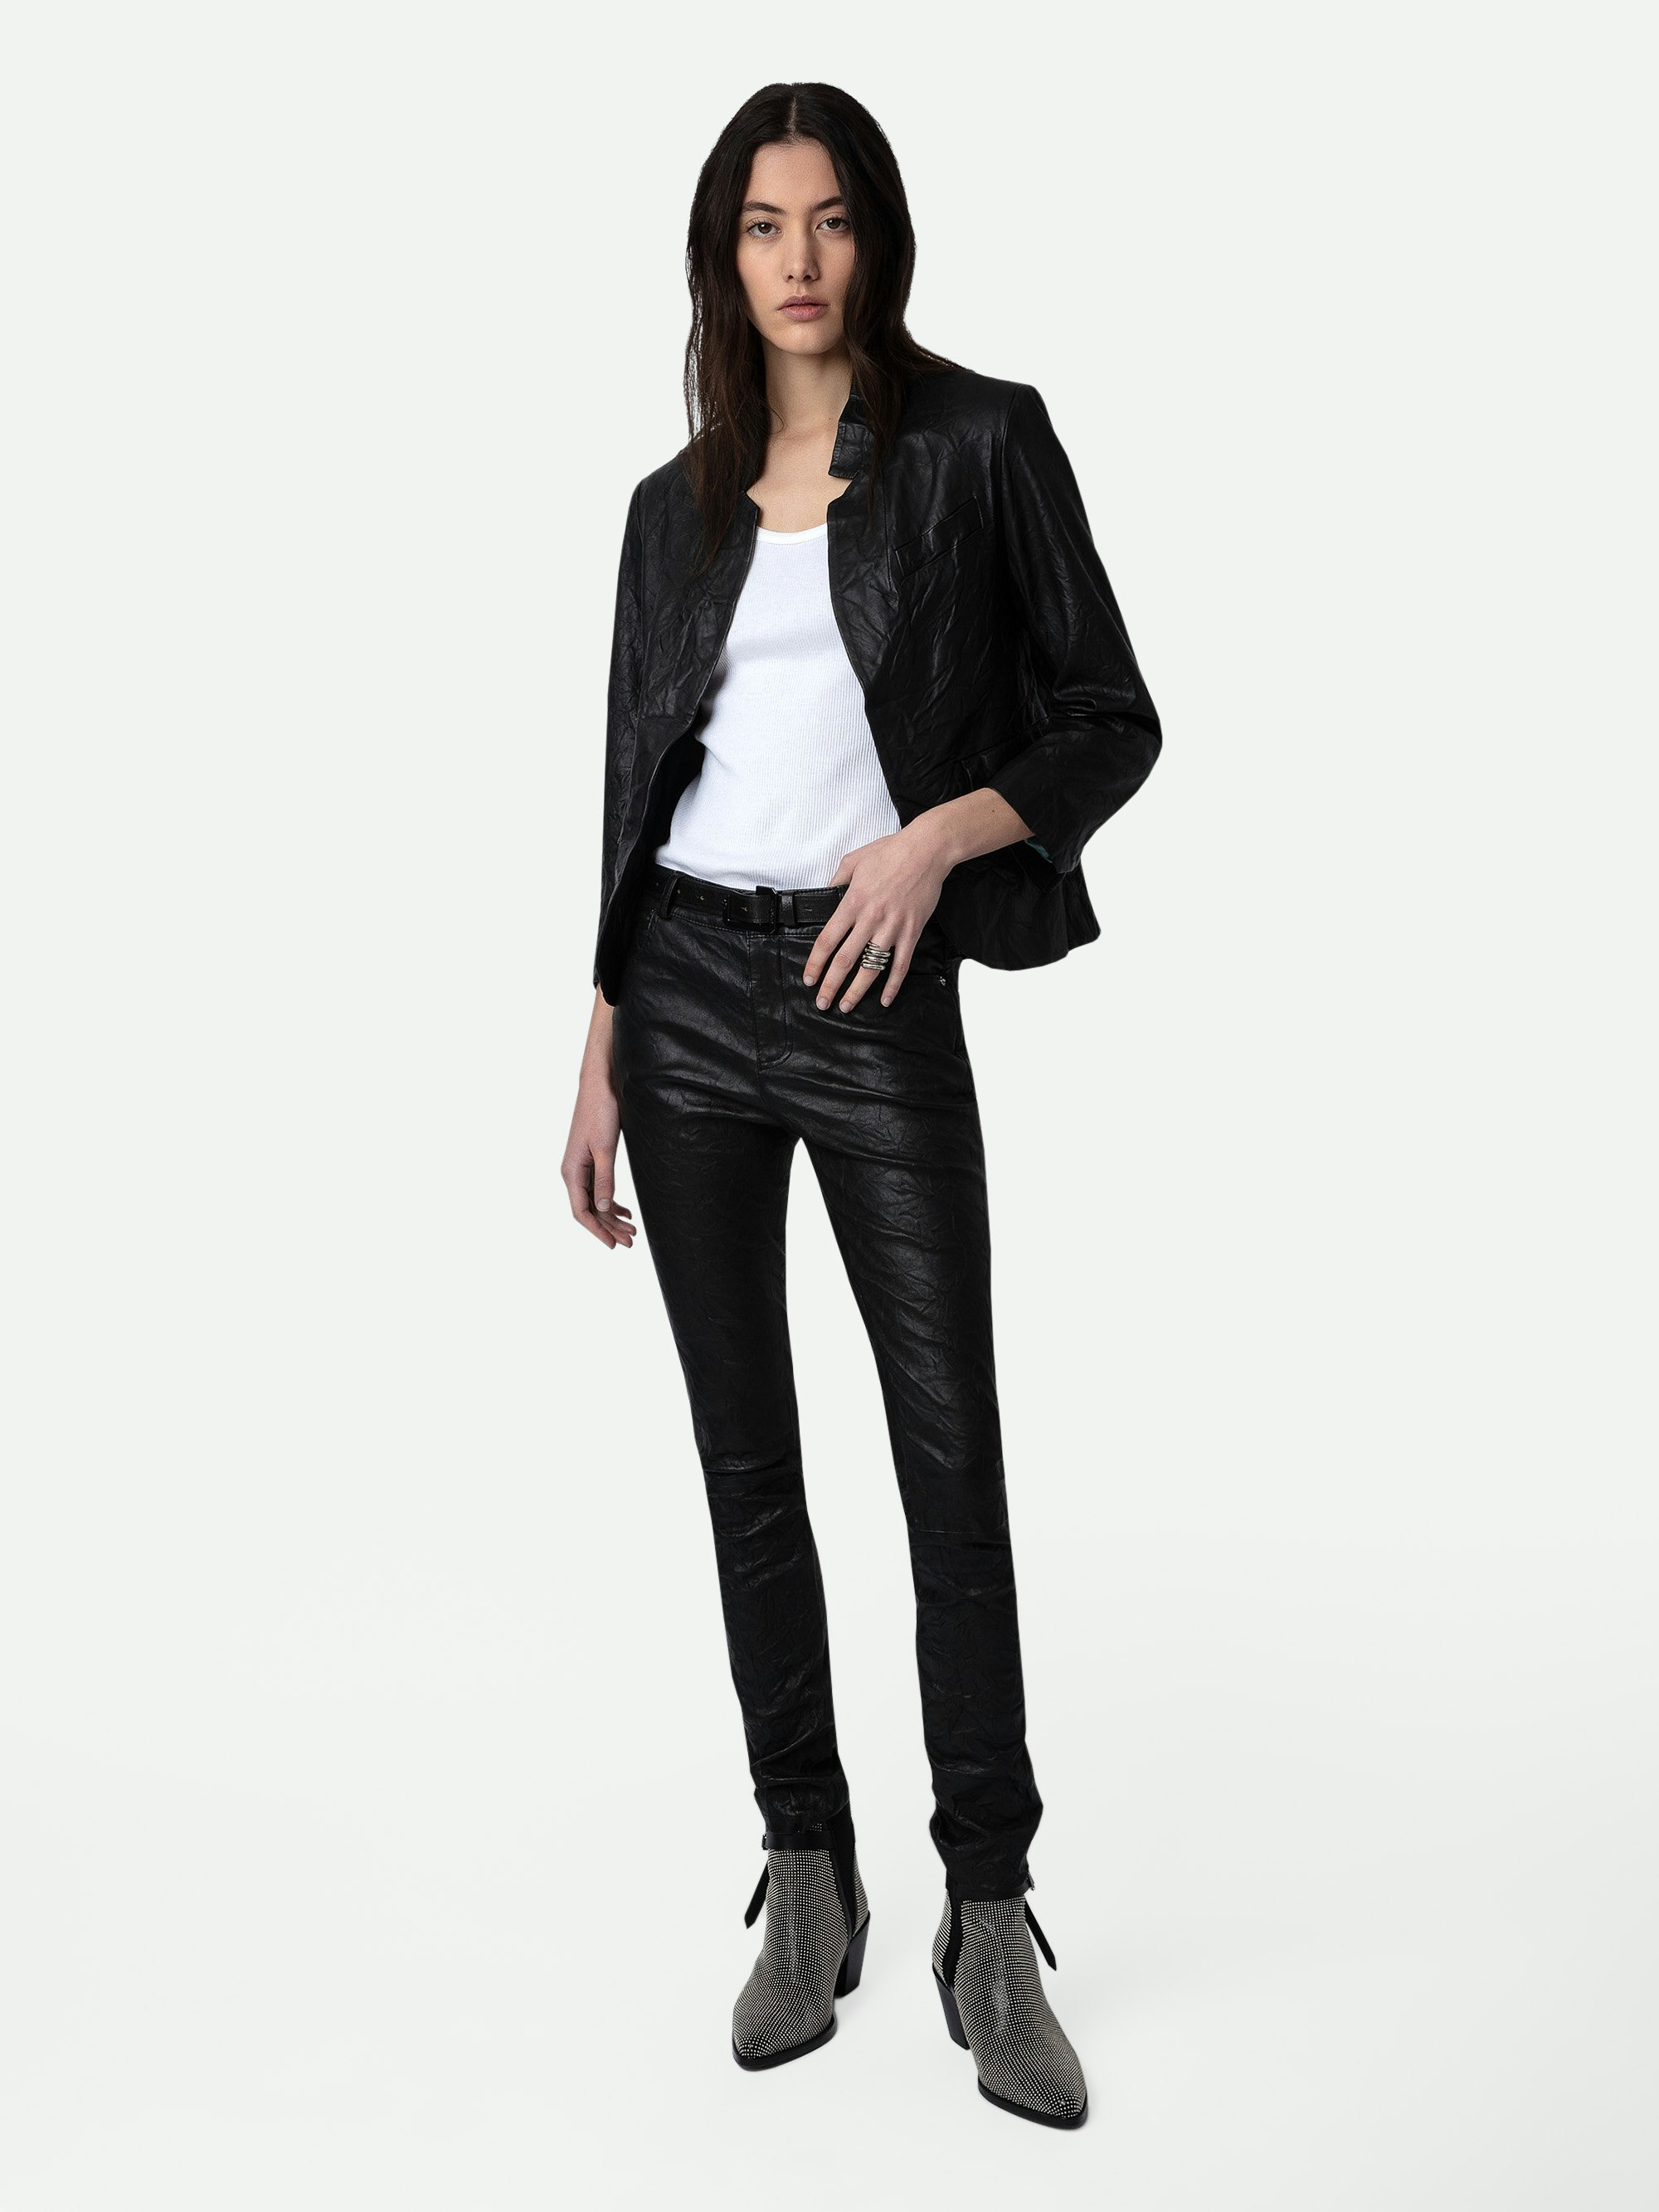 Phlame Crinkled Leather Pants - Women's black leather pants